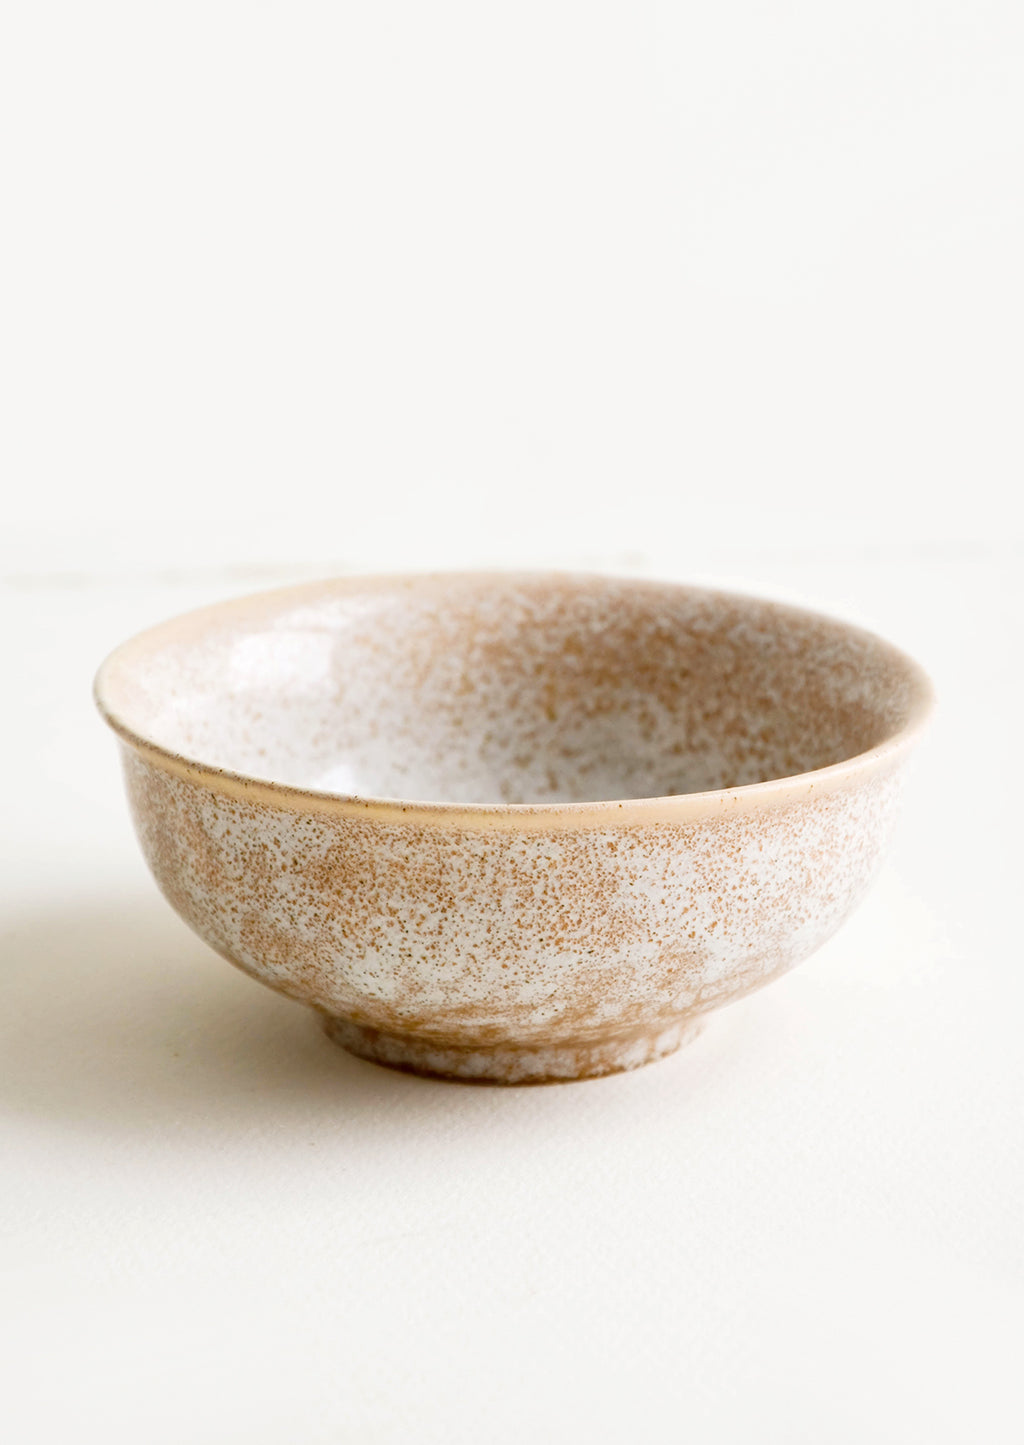 2: Small ceramic bowl with footed silhouette in reactive brown glaze